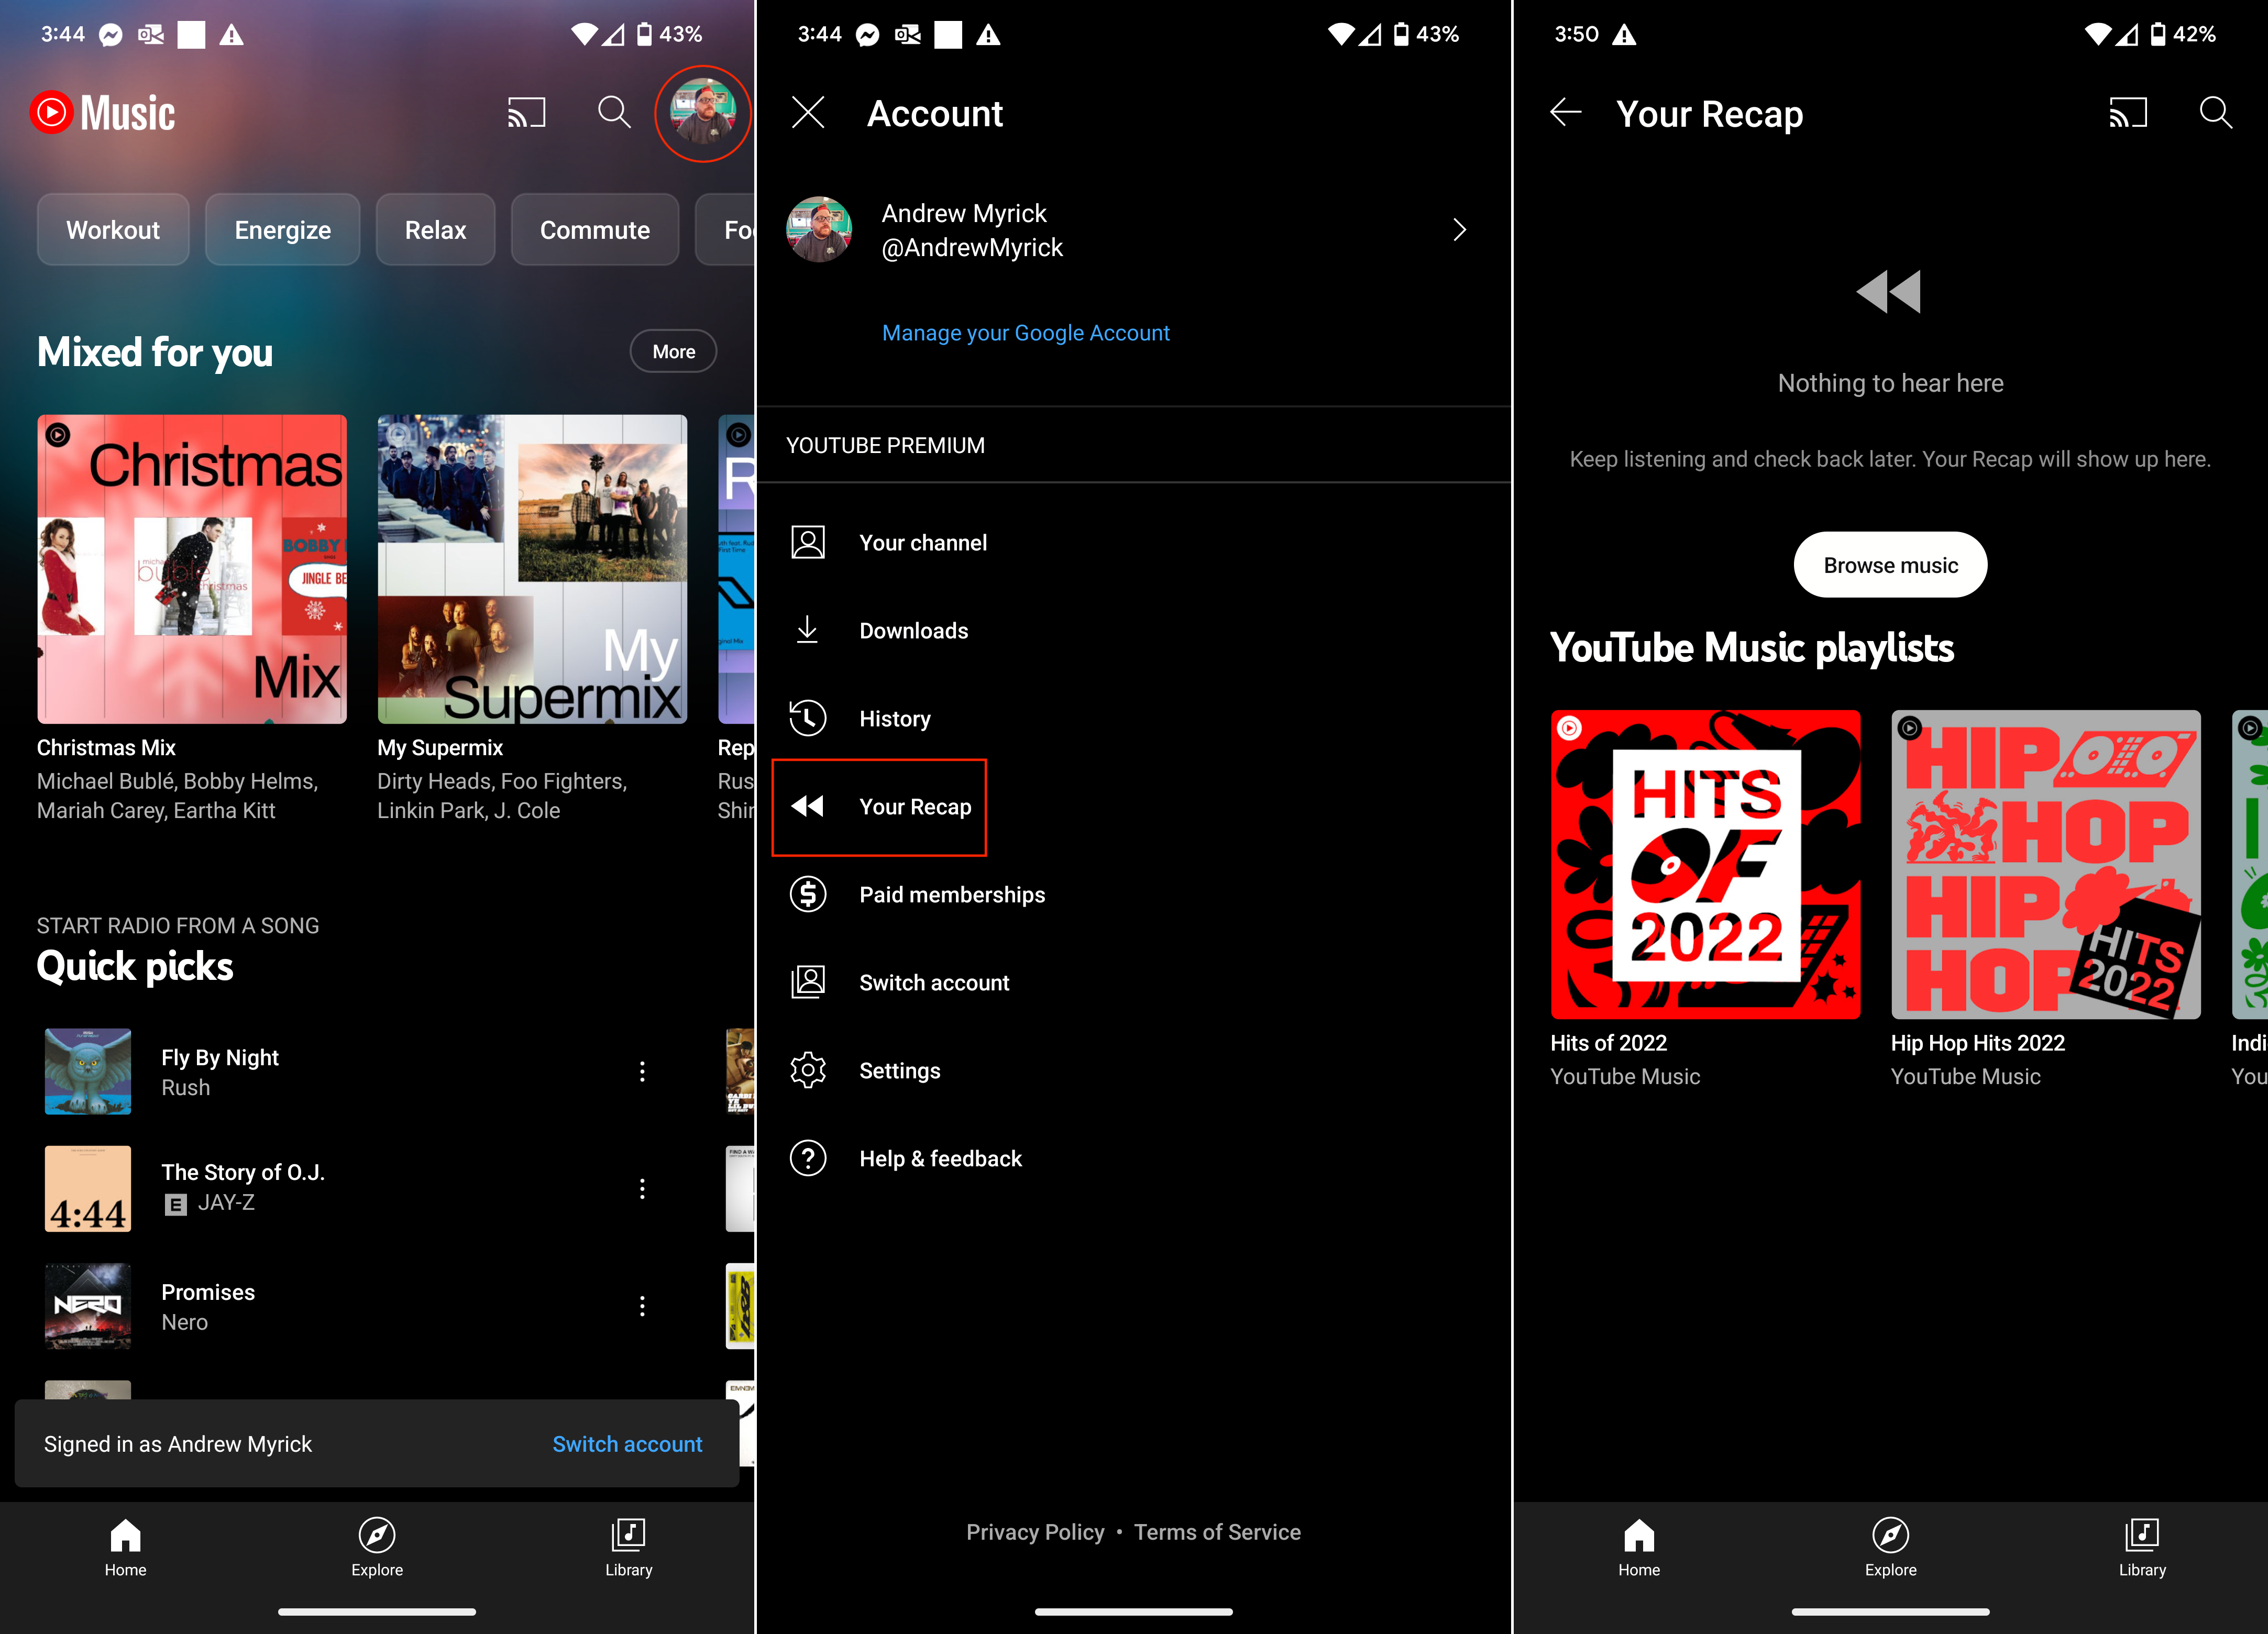 How to find 2022 YouTube Music Your Recap